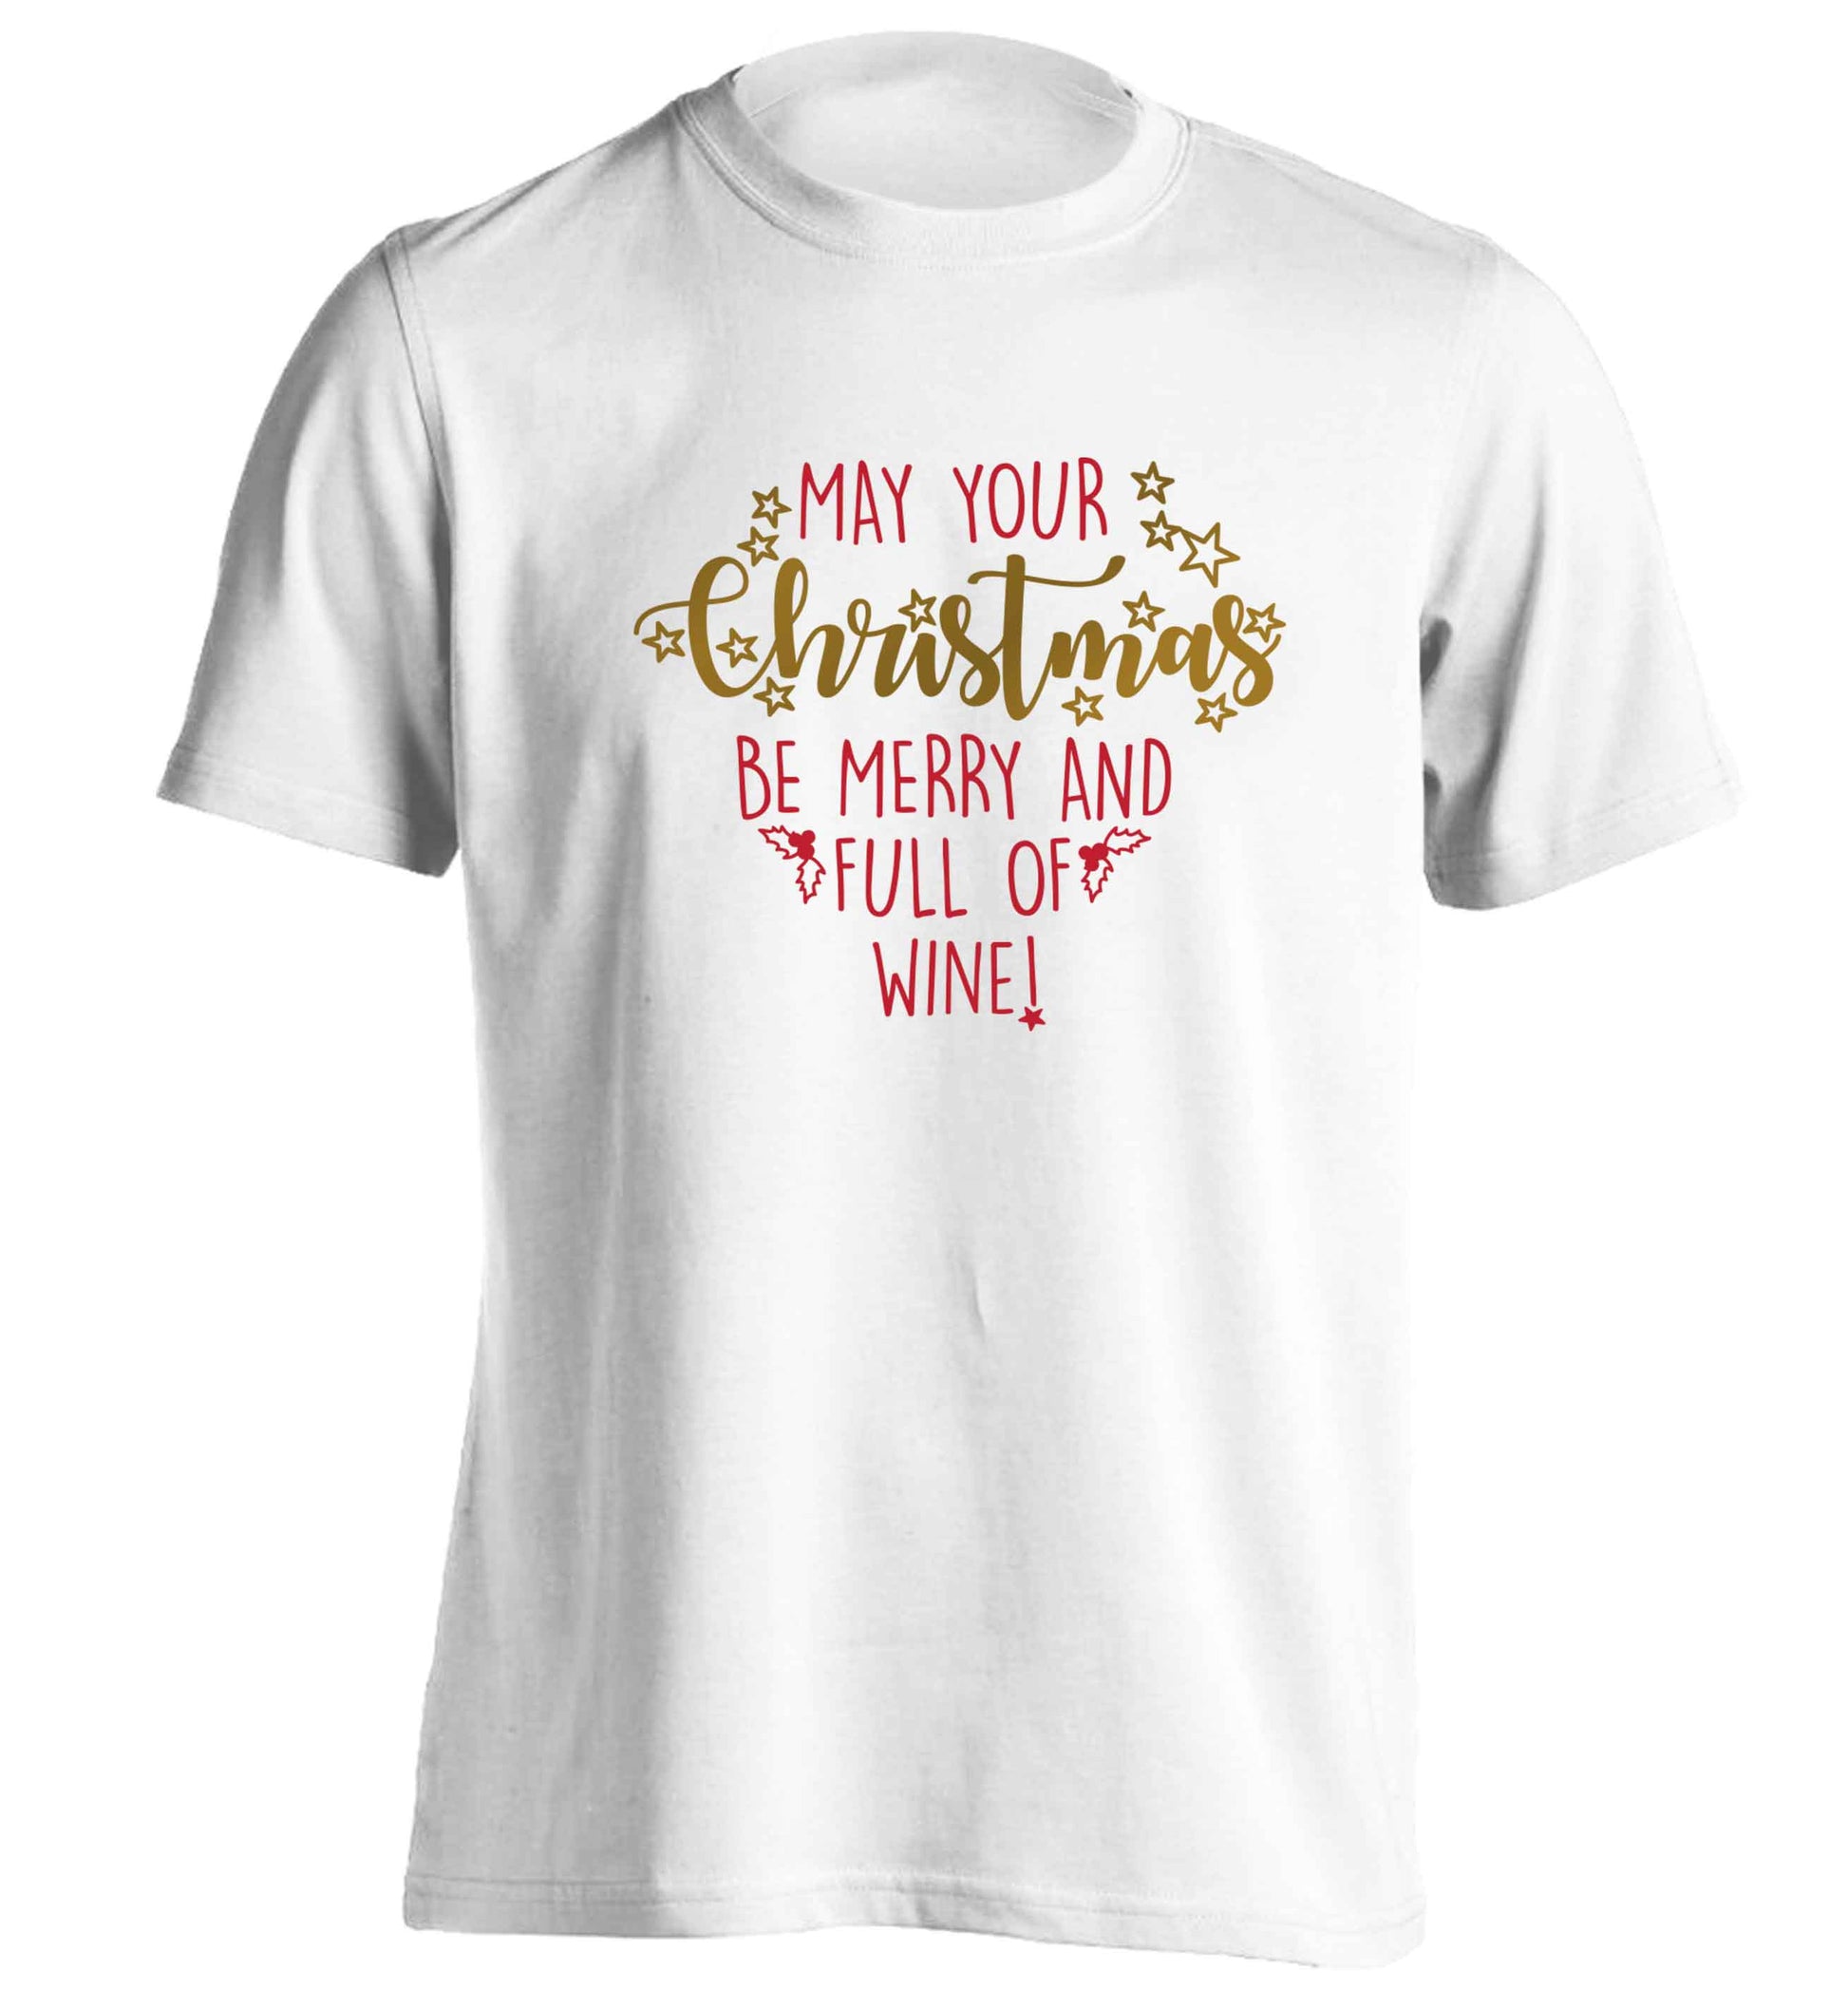 May your Christmas be merry and full of wine adults unisex white Tshirt 2XL